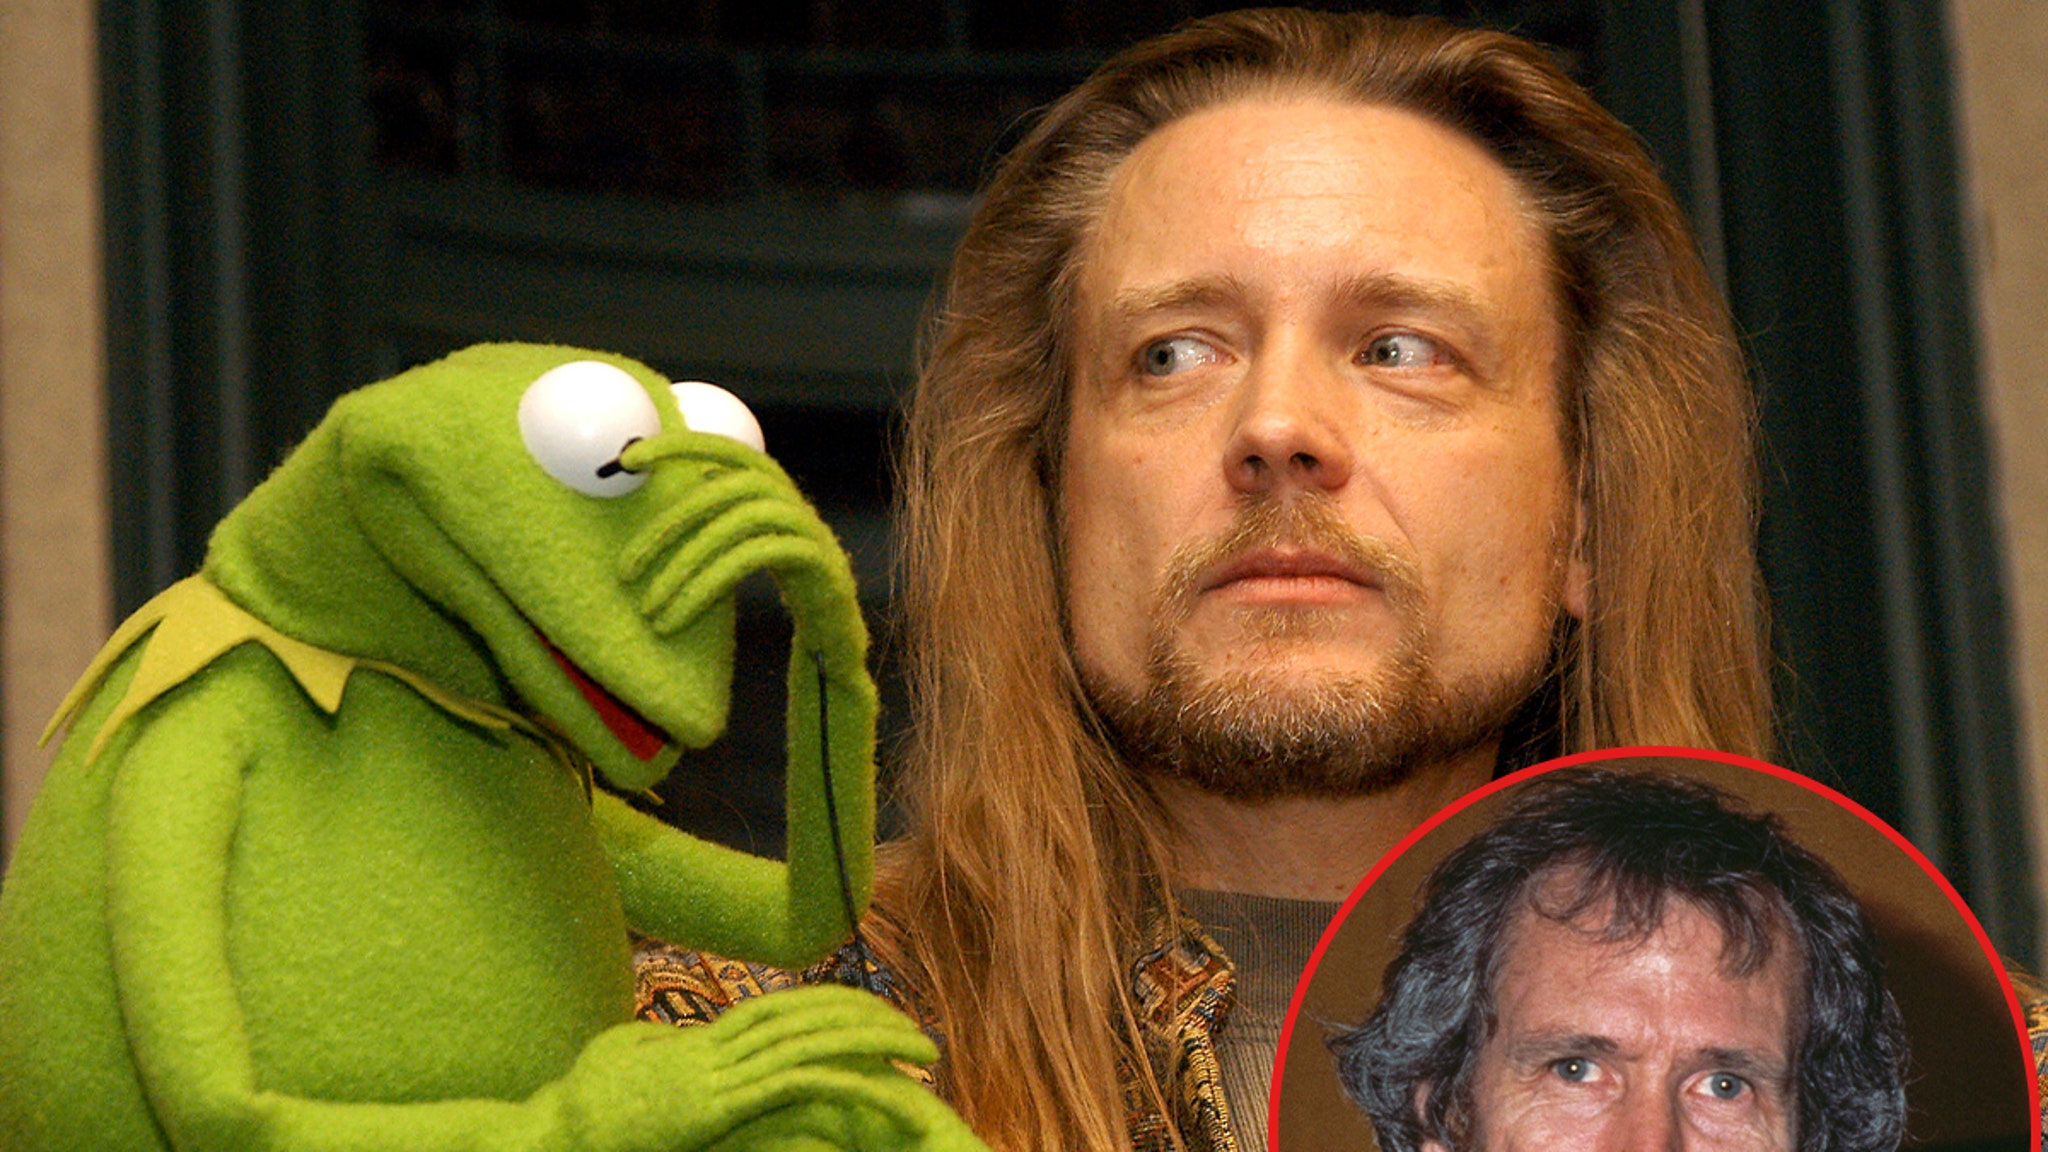 Kermit Voice Actor Says Jim Henson’s Spirit Has ‘Withered’ Ahead of New Doc